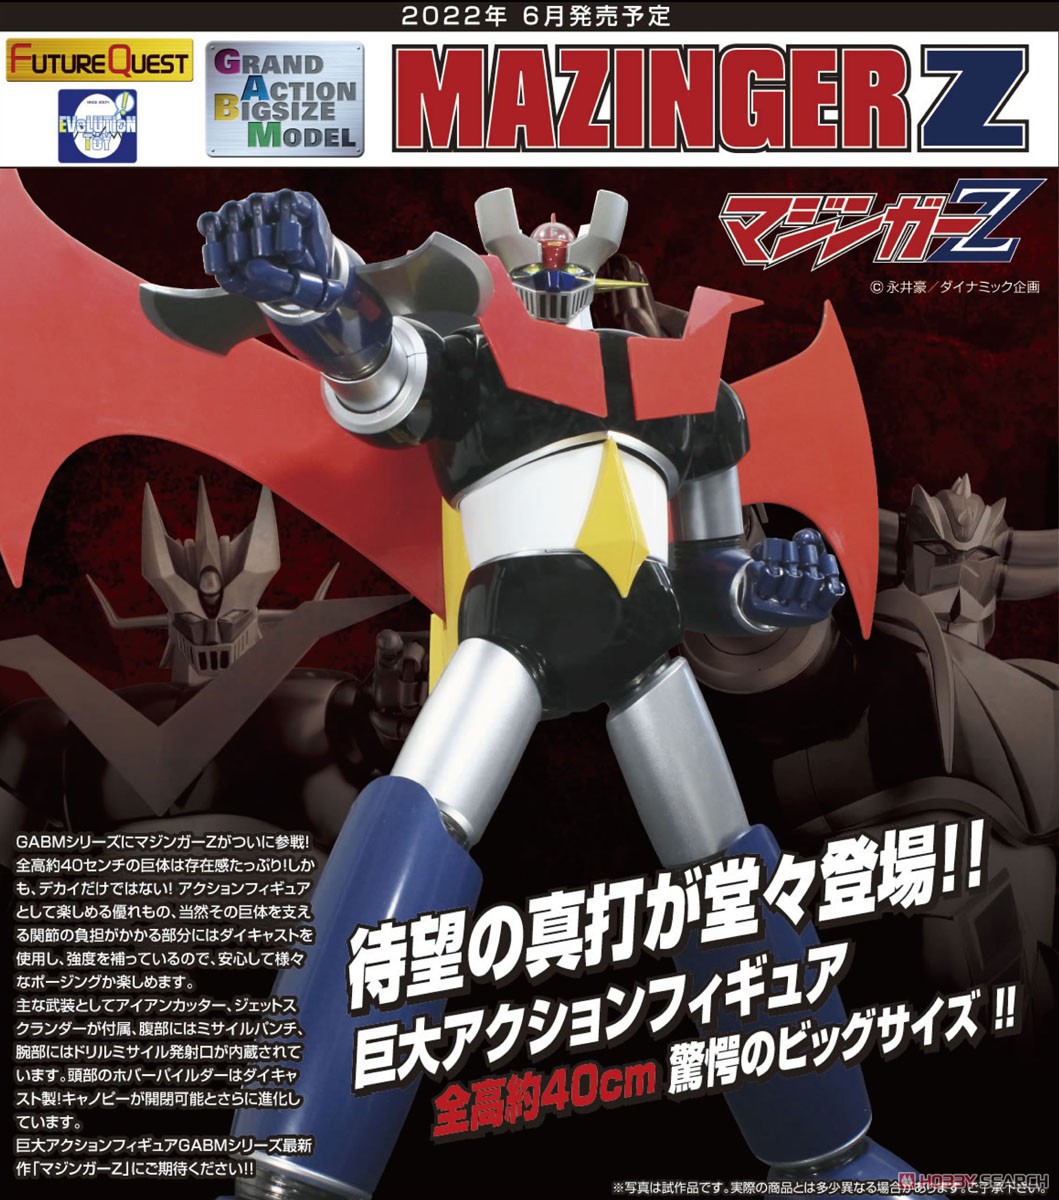 Grand Action Bigsize Model Mazinger Z (Completed) Item picture9